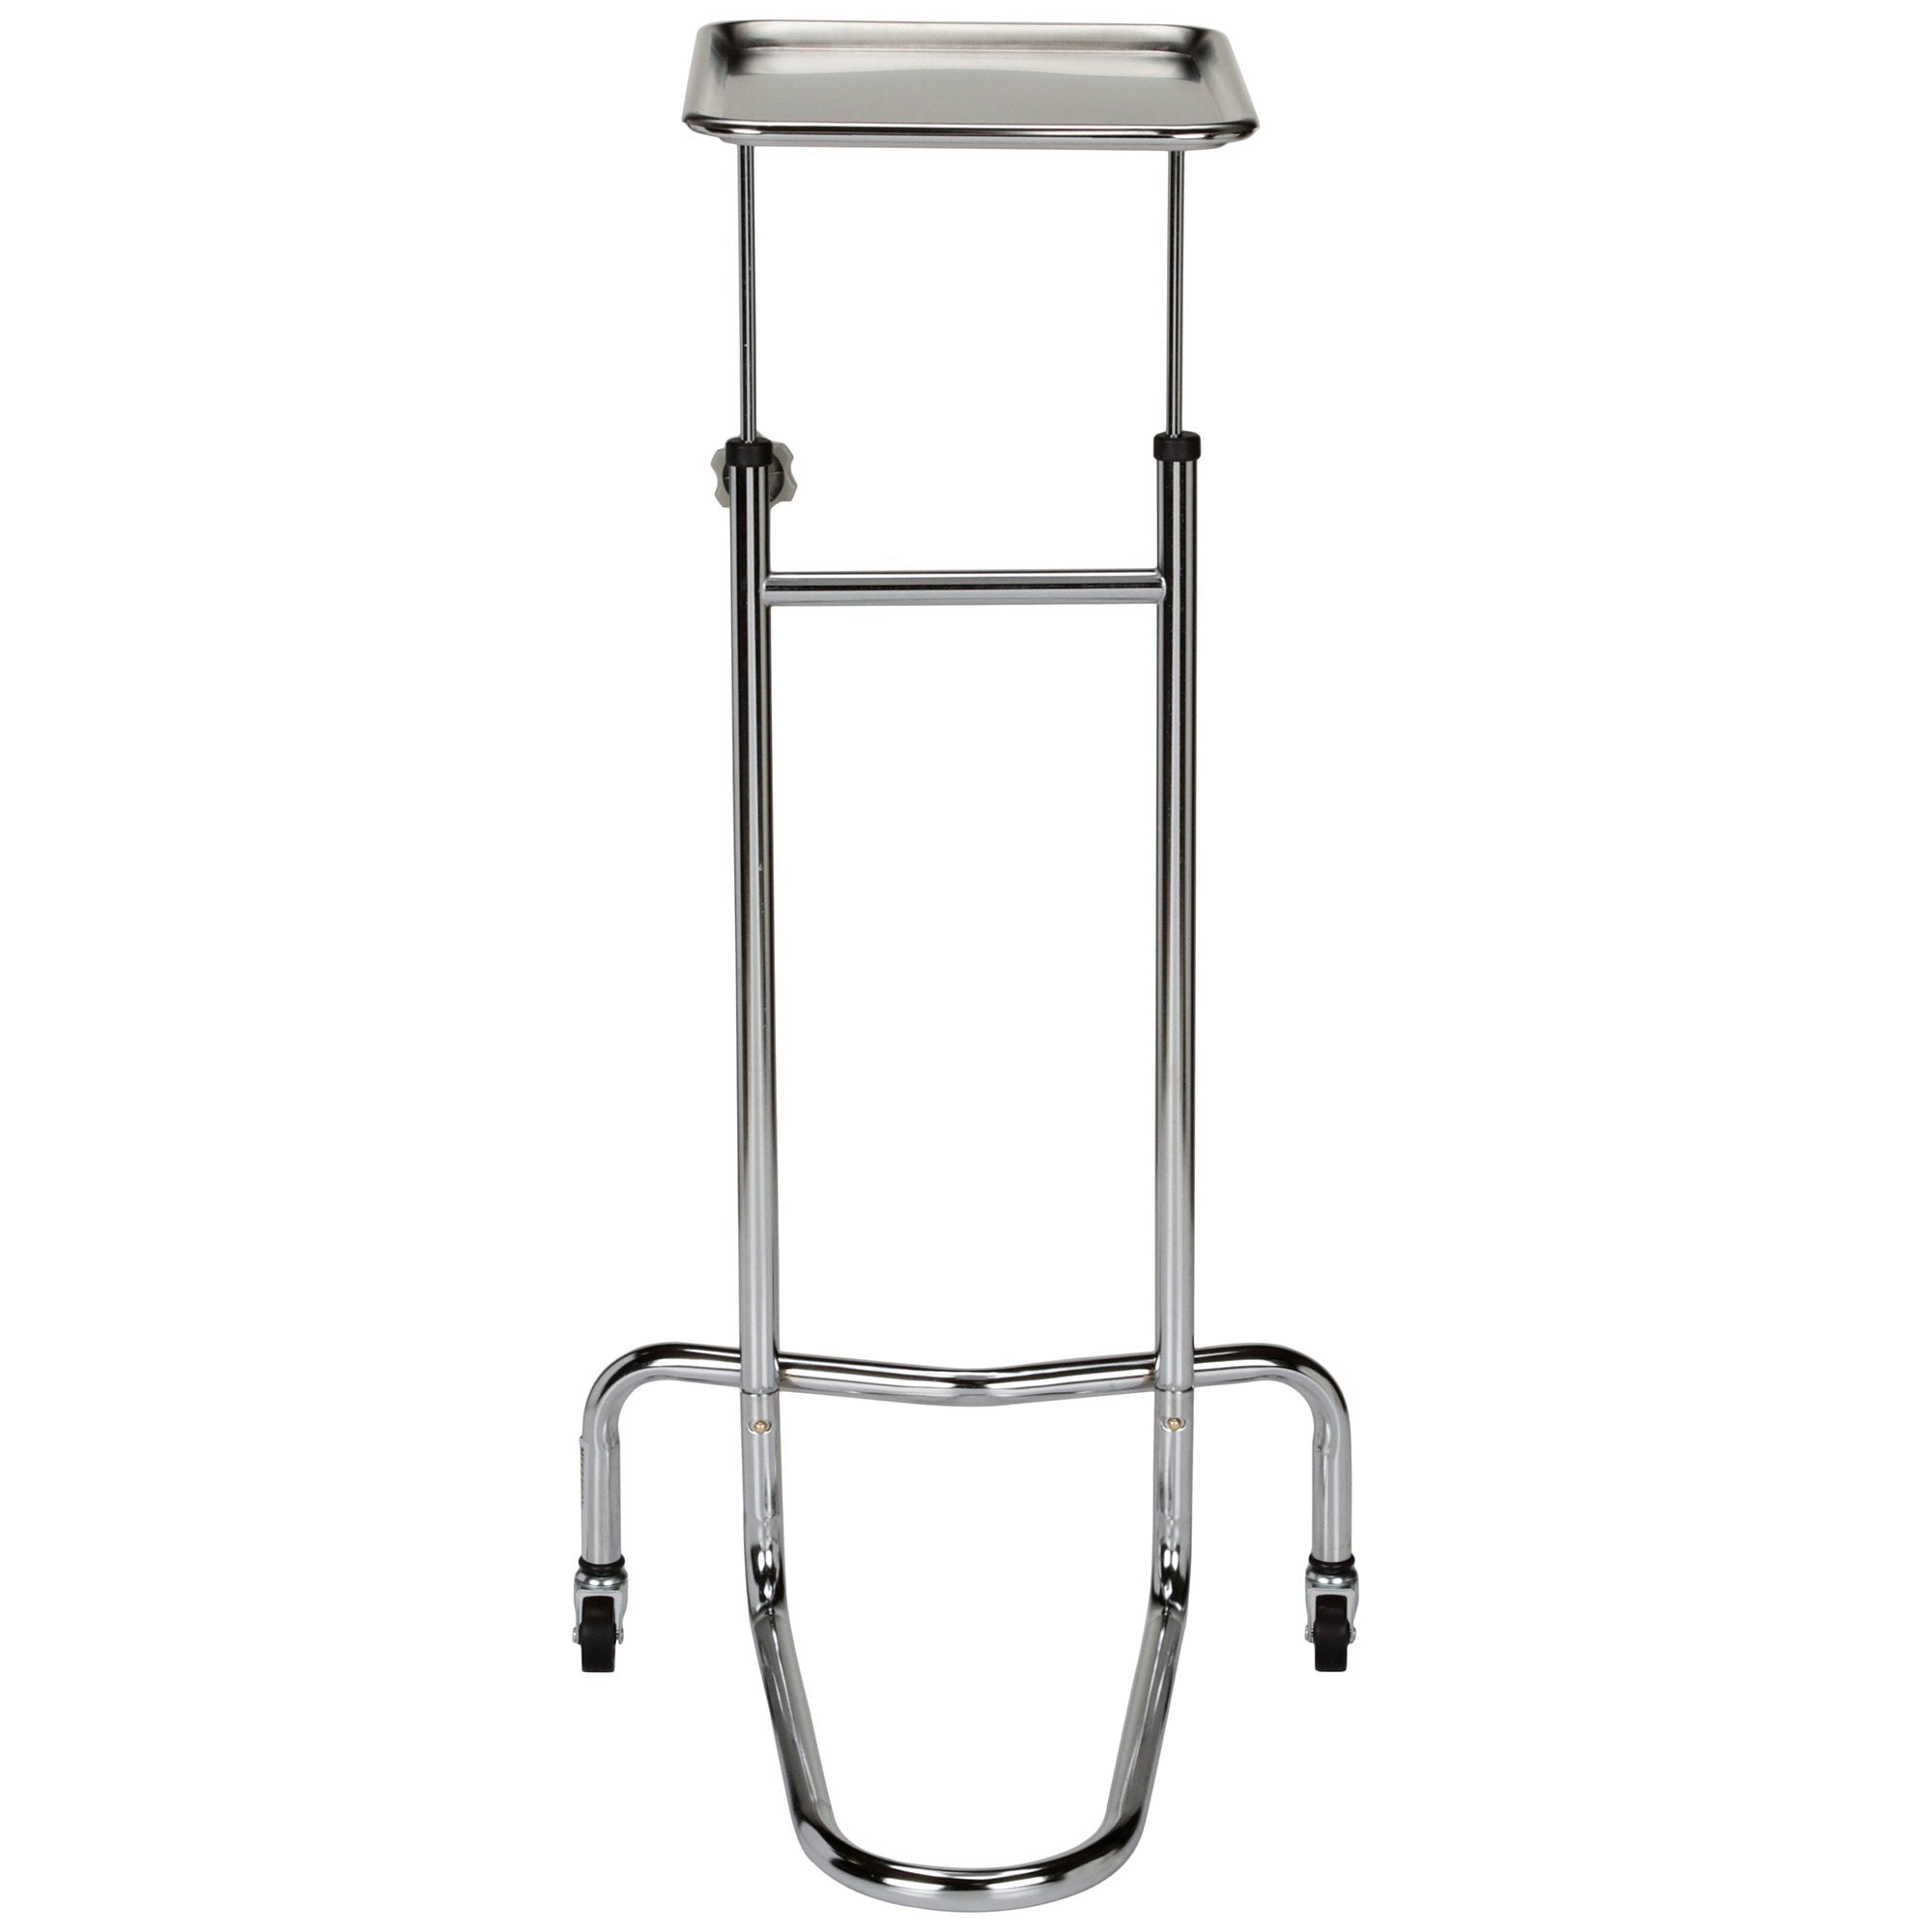 Mayo Instrument Stand McKesson 5 lbs. Tray V-Shaped Base 34 to 53 Inch Height Range 12.62 X 19.25 X 0.75 Inch